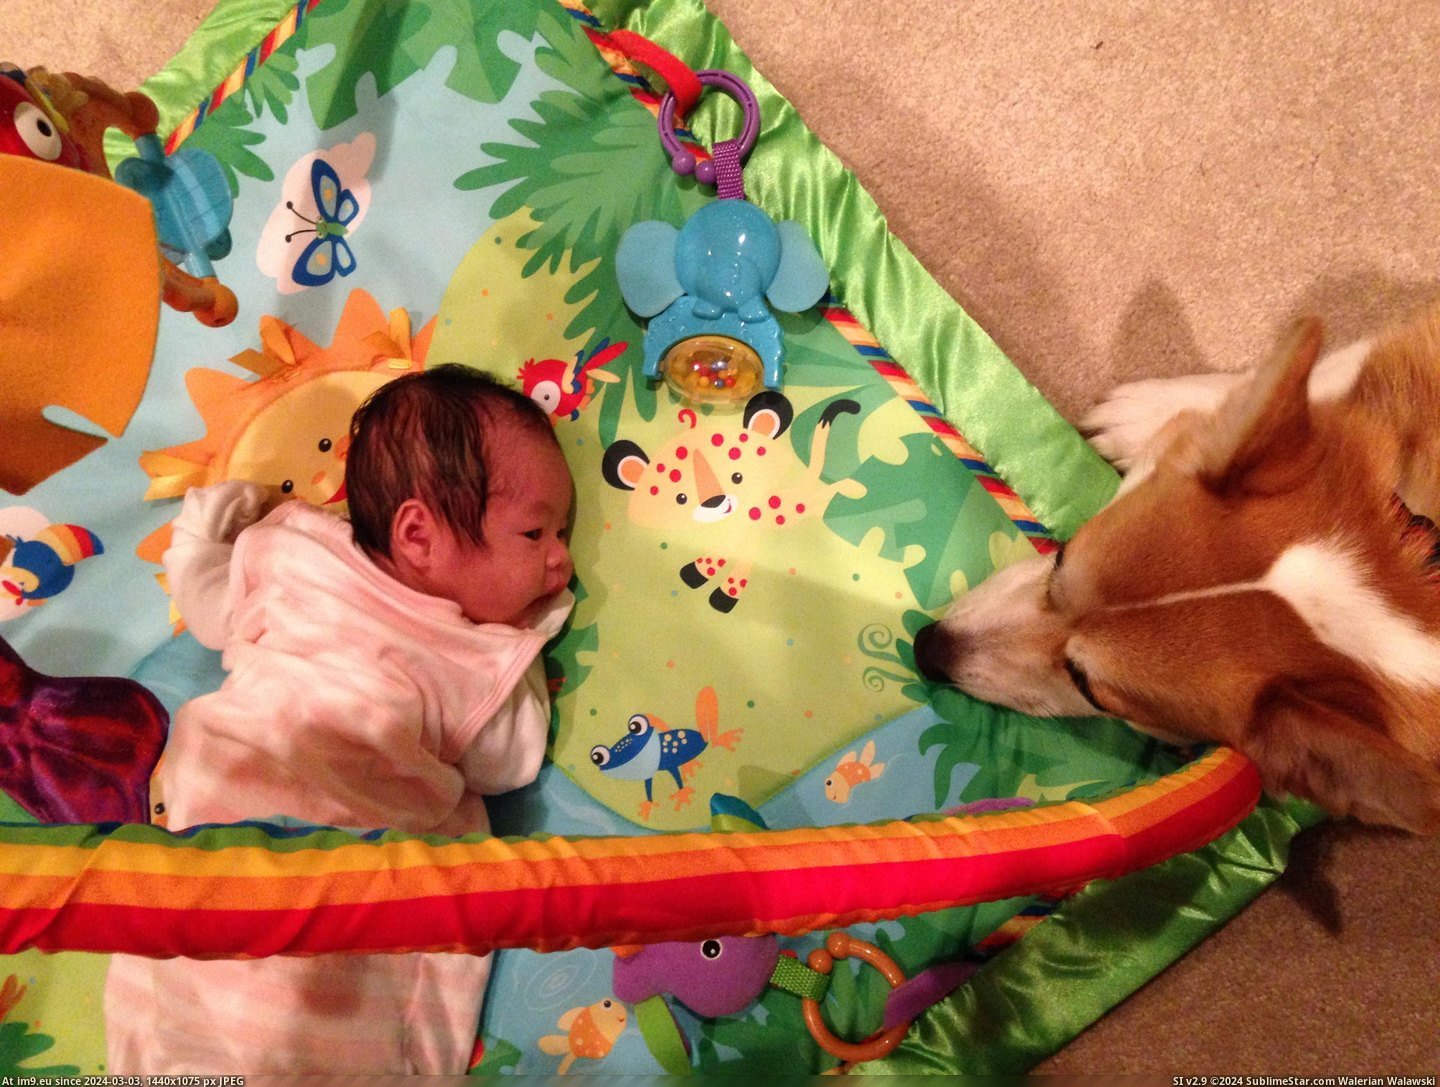 #Was #New #Ago #But #How #Daughter #Weeks #Born [Aww] My daughter was born three weeks ago. I worried about how my corgi would react but he's treating her like his new BFF... 2 Pic. (Изображение из альбом My r/AWW favs))